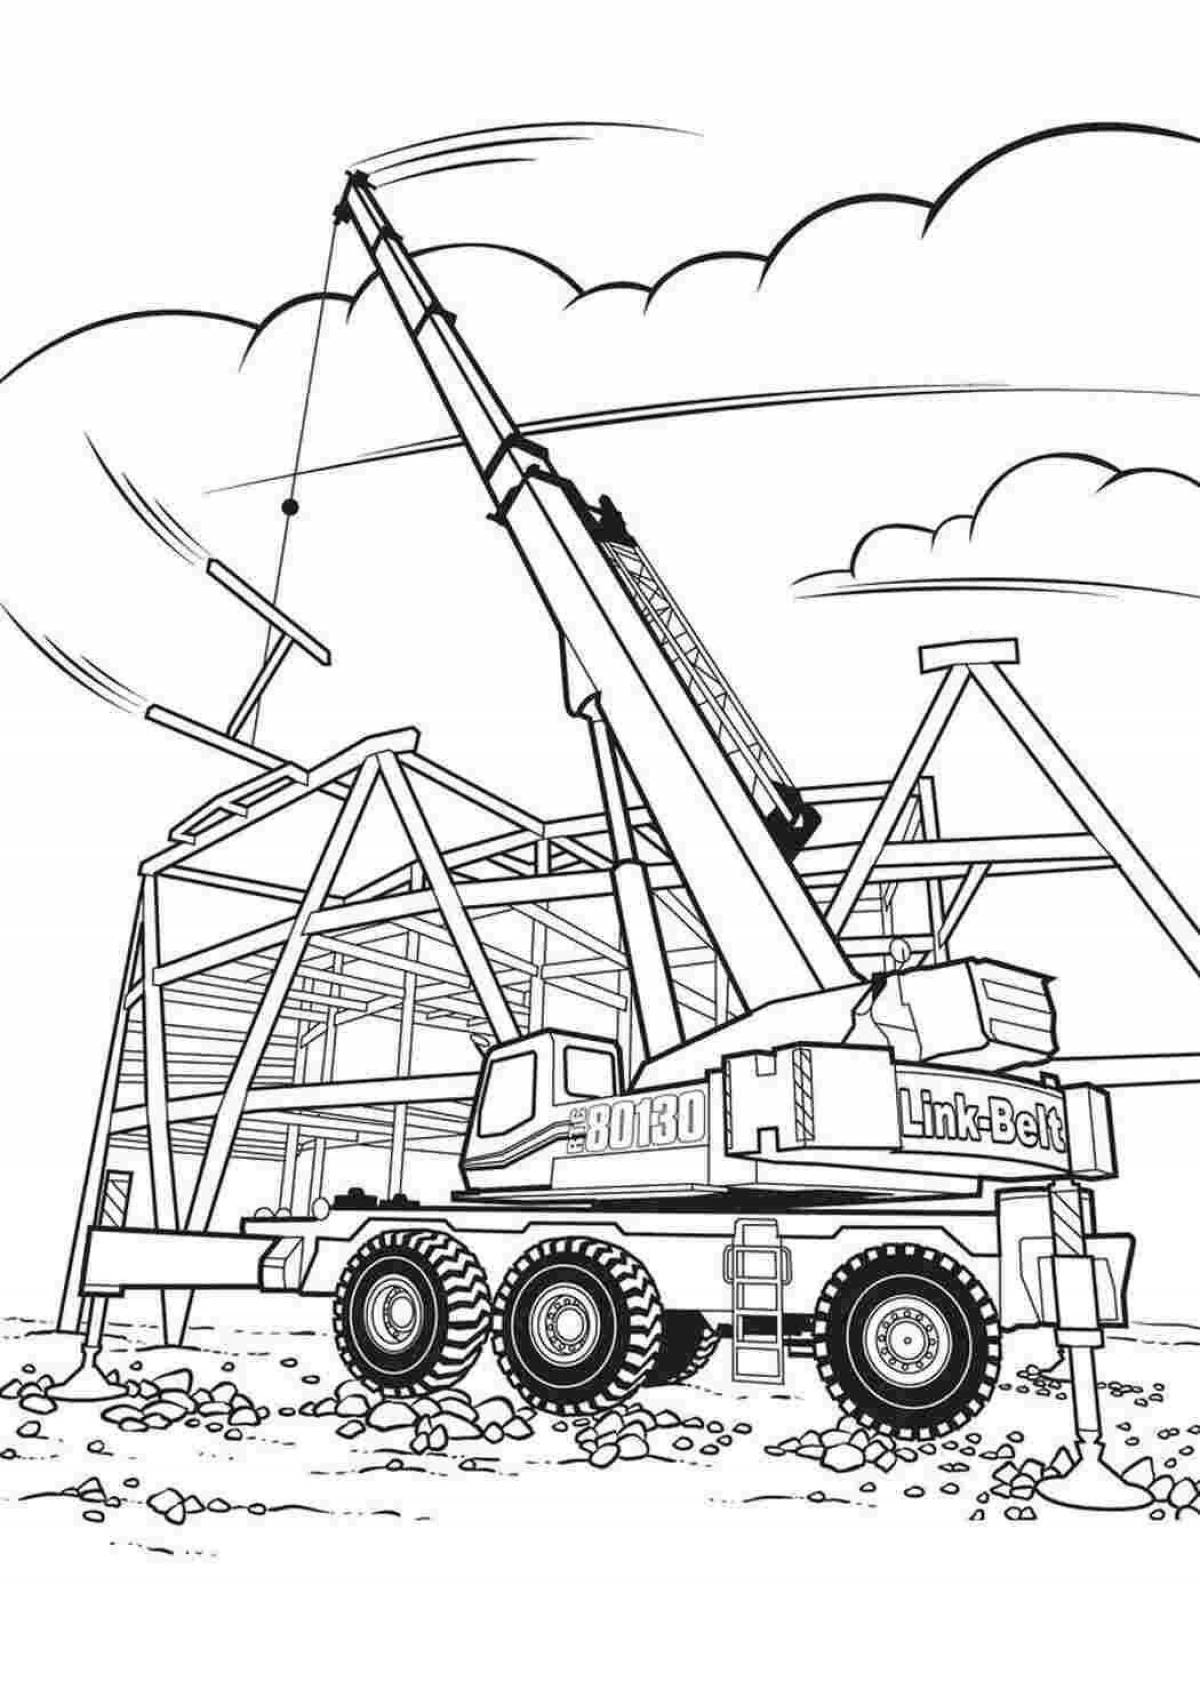 Cute boys construction machinery coloring page